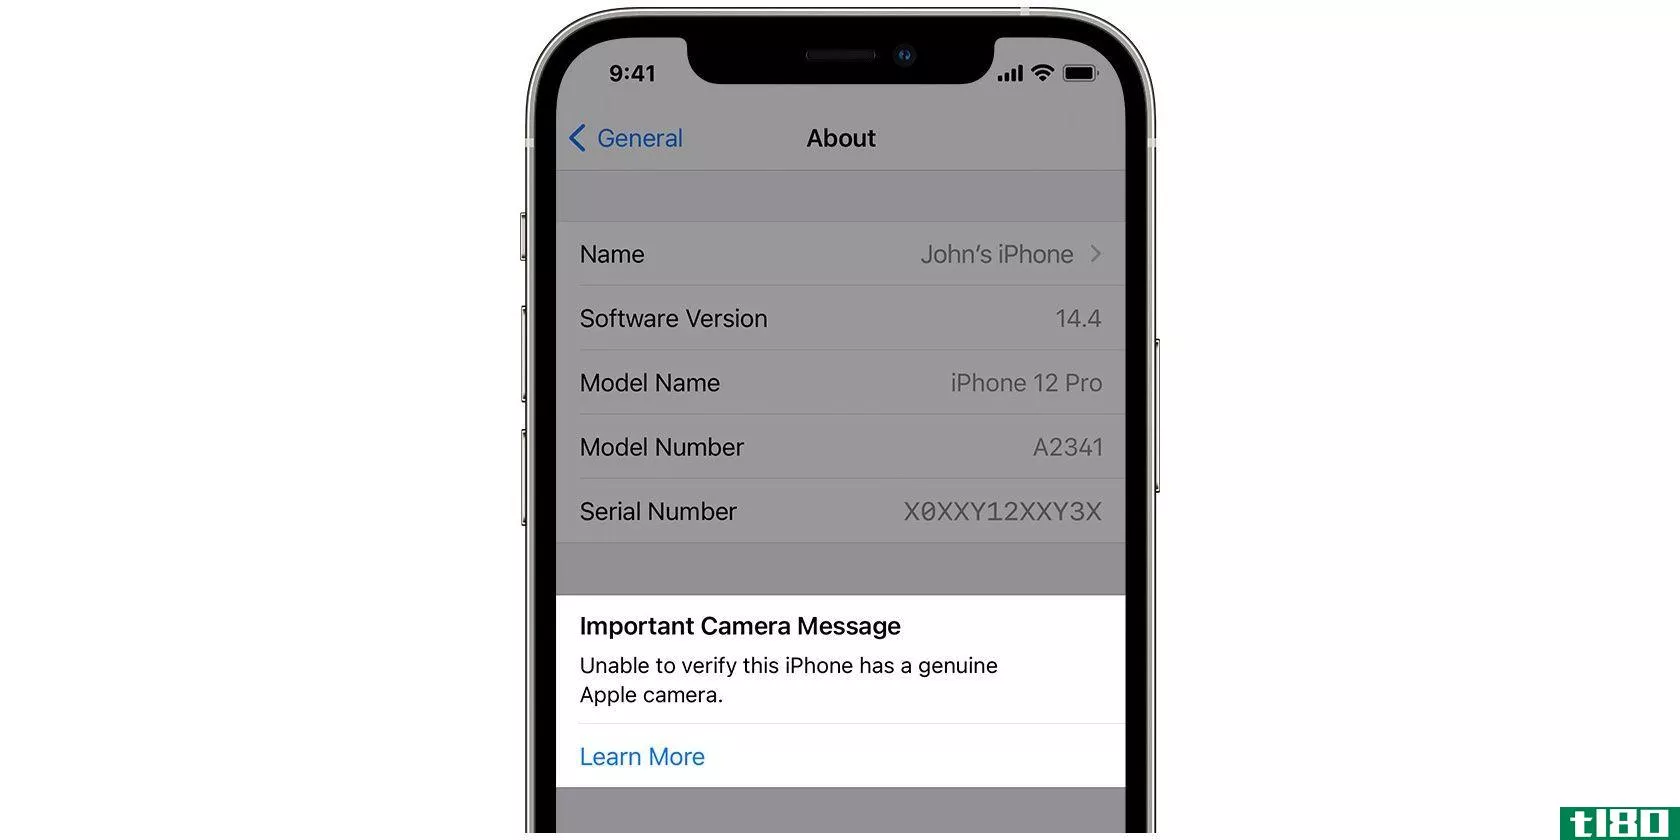 A screenshot showing a warning in the Settings app on iOS 14 about a non-Apple camera detected in the iPhone